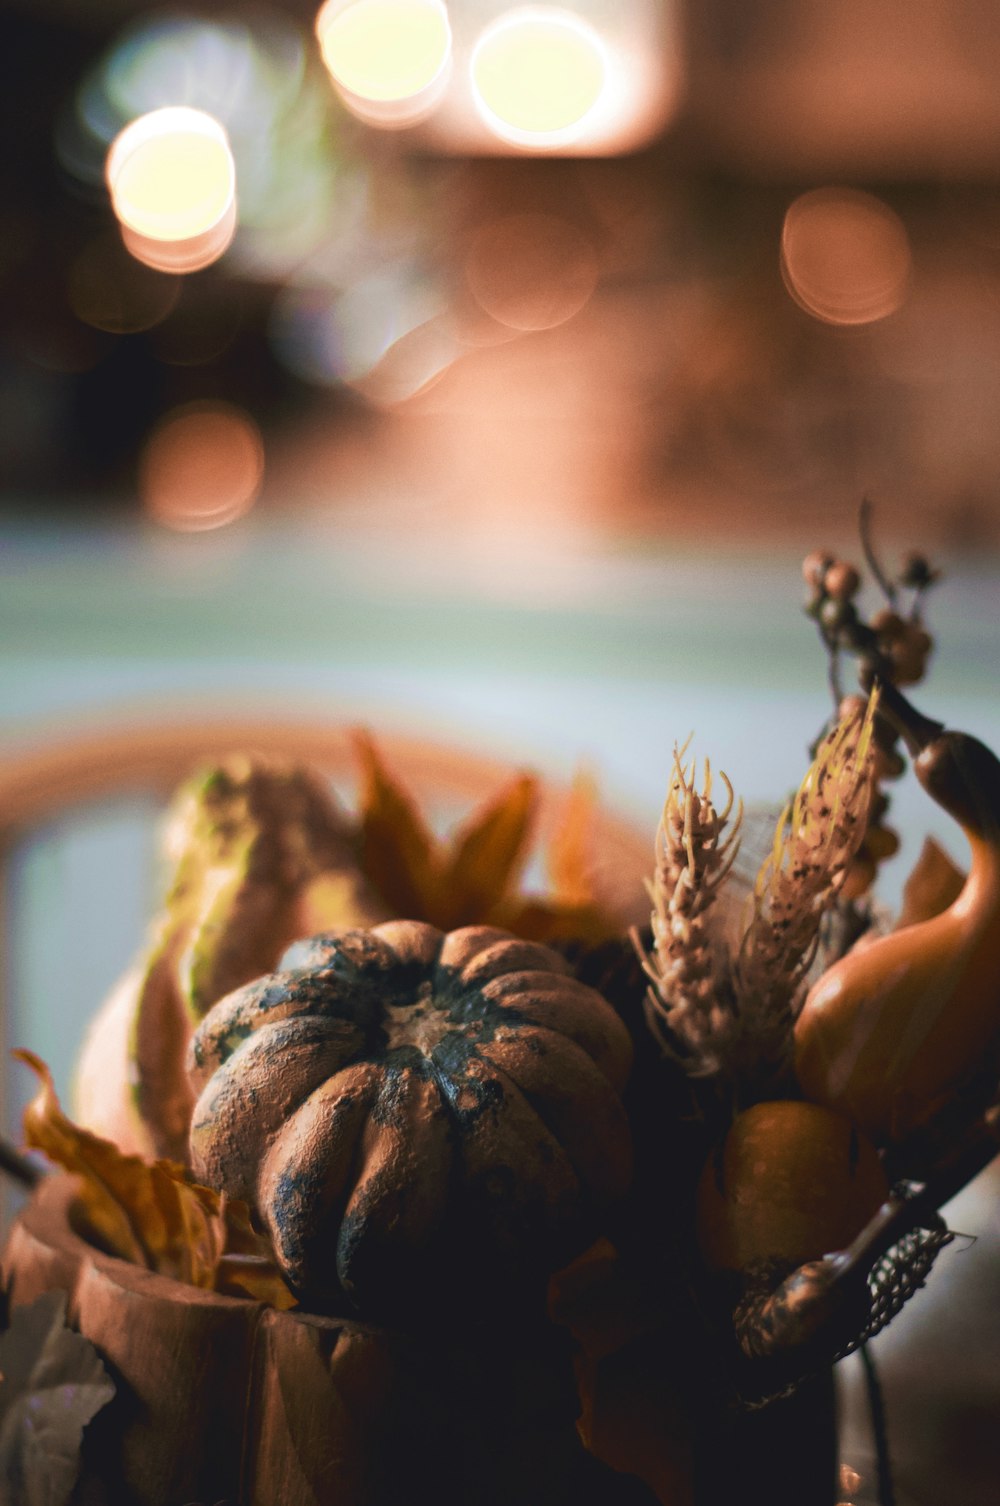 a close up of a small pumpkin on a table